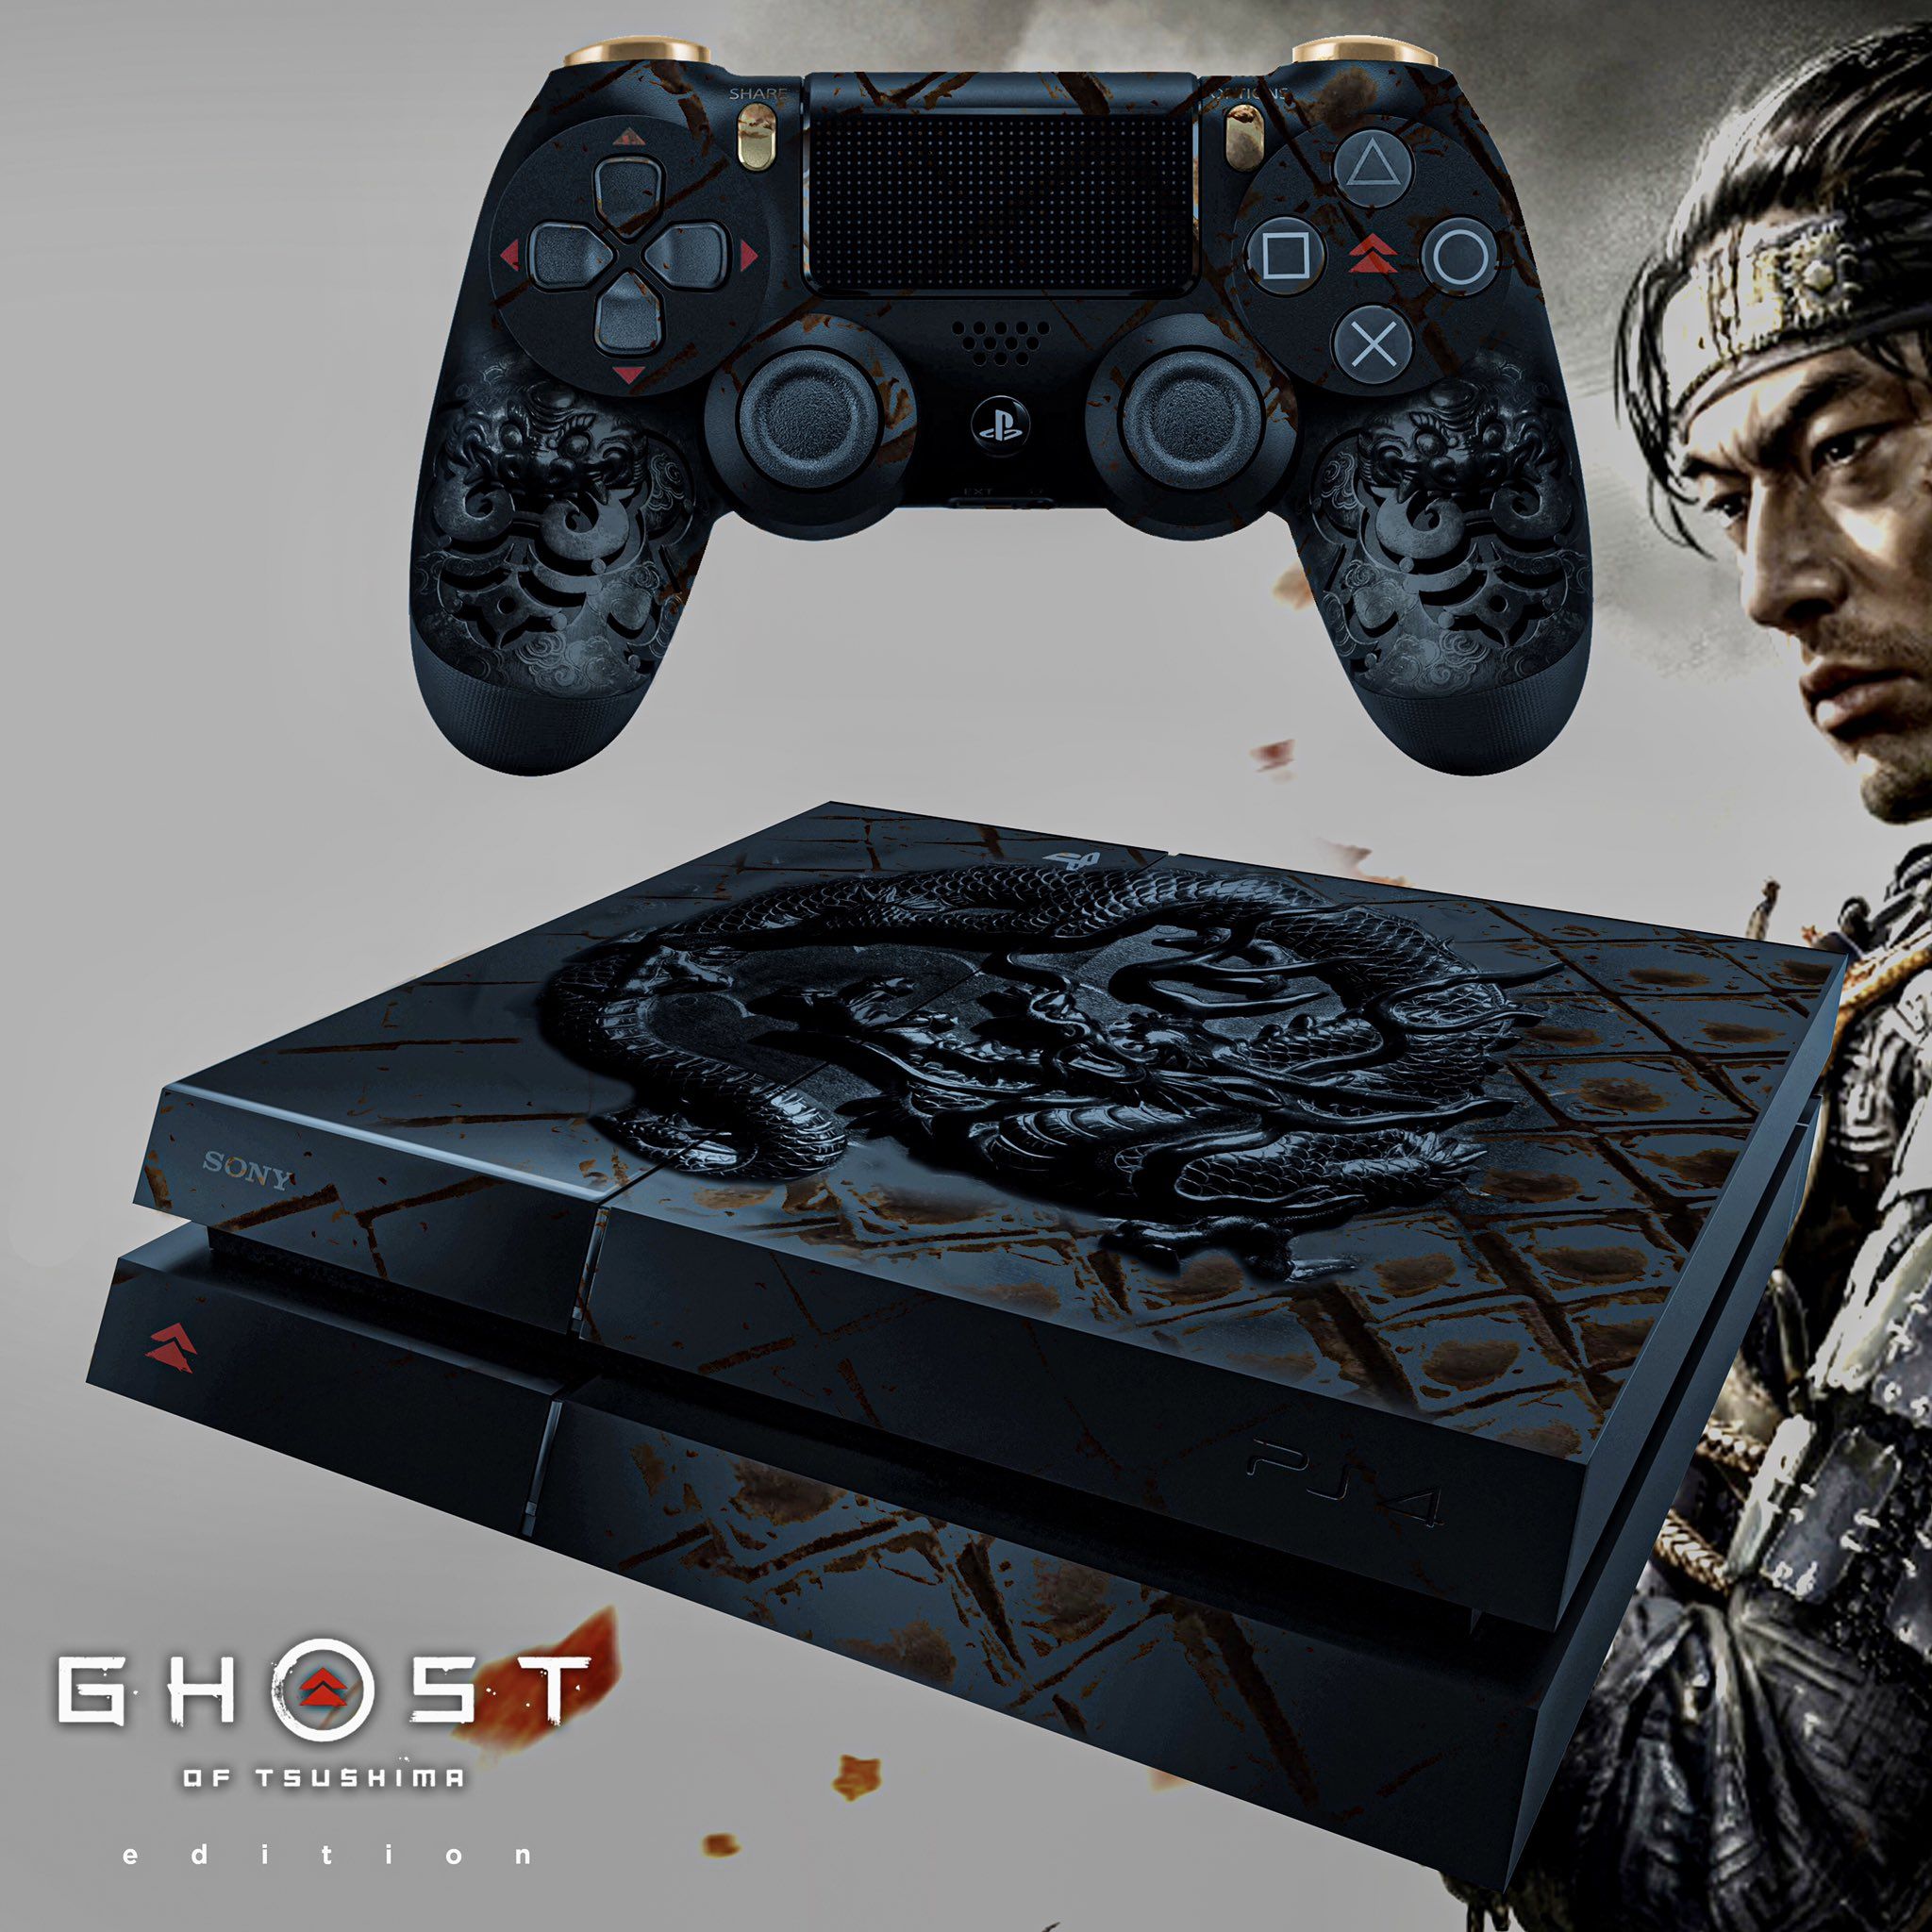 Tsushima a Ghost Fit PS4 Inspired Samurai Is Design for of